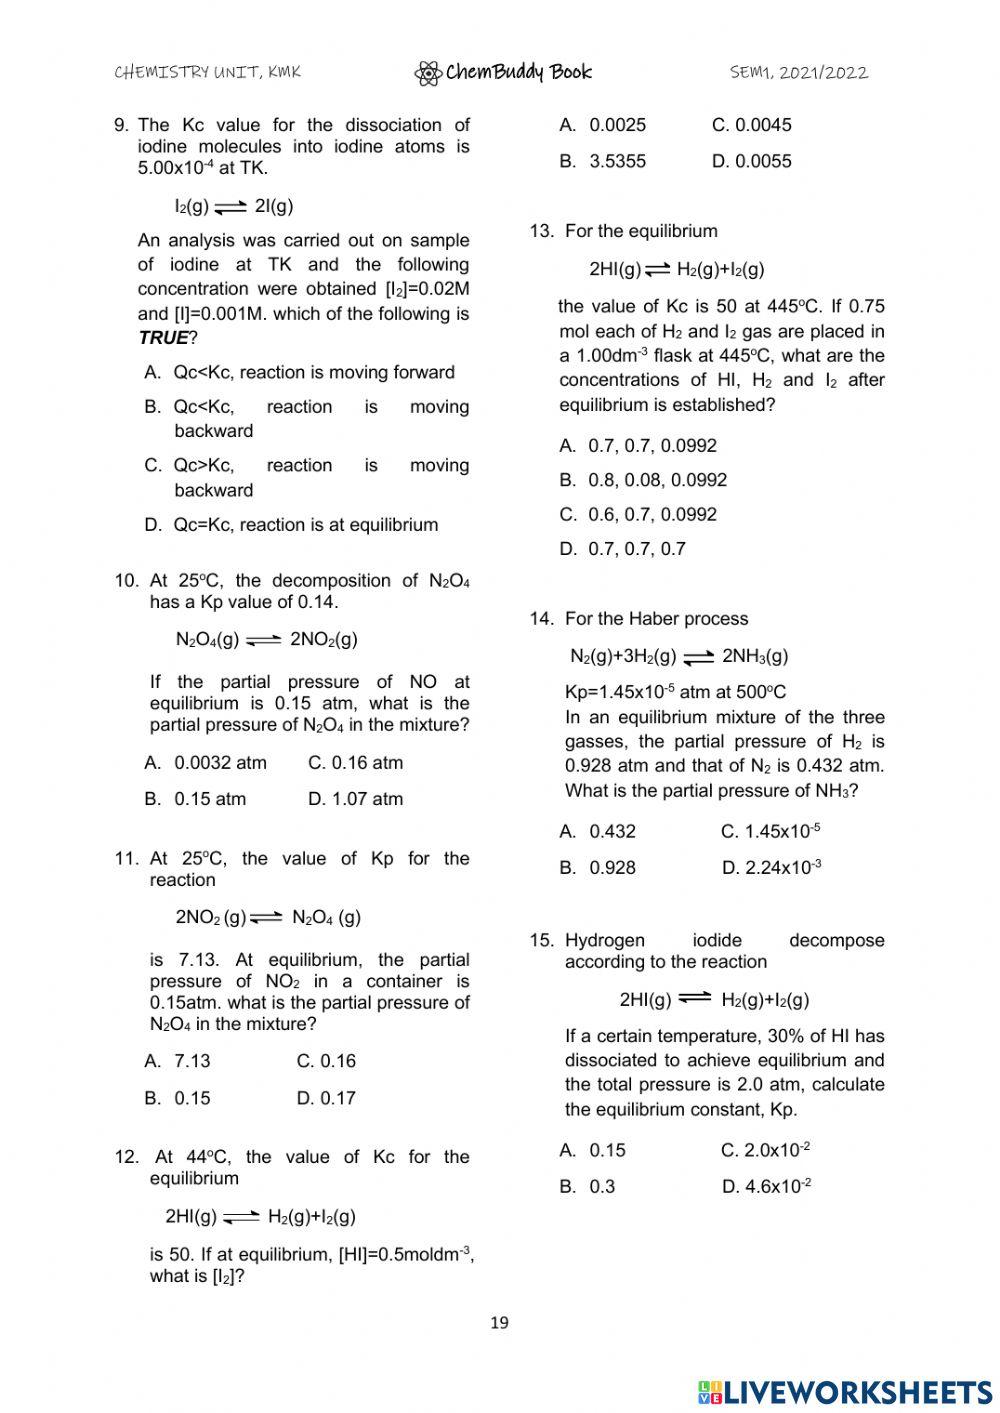 Chembuddy chemical equilibrium page 2